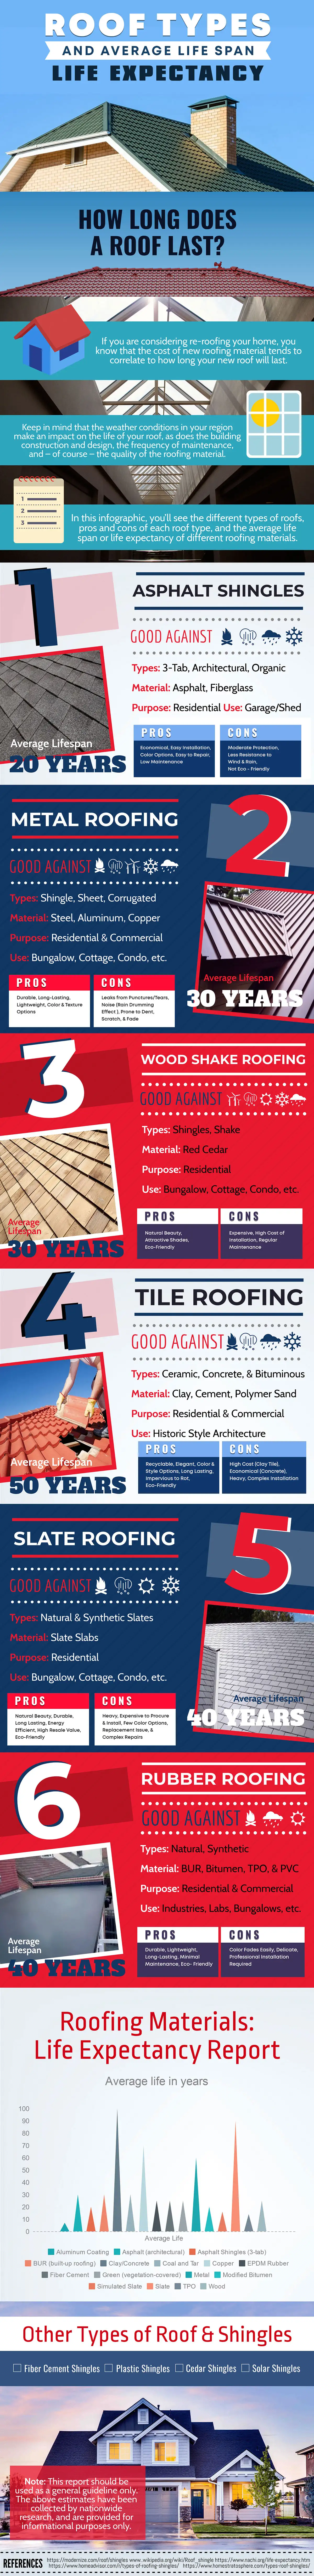 Roof Types and Average Lifespan